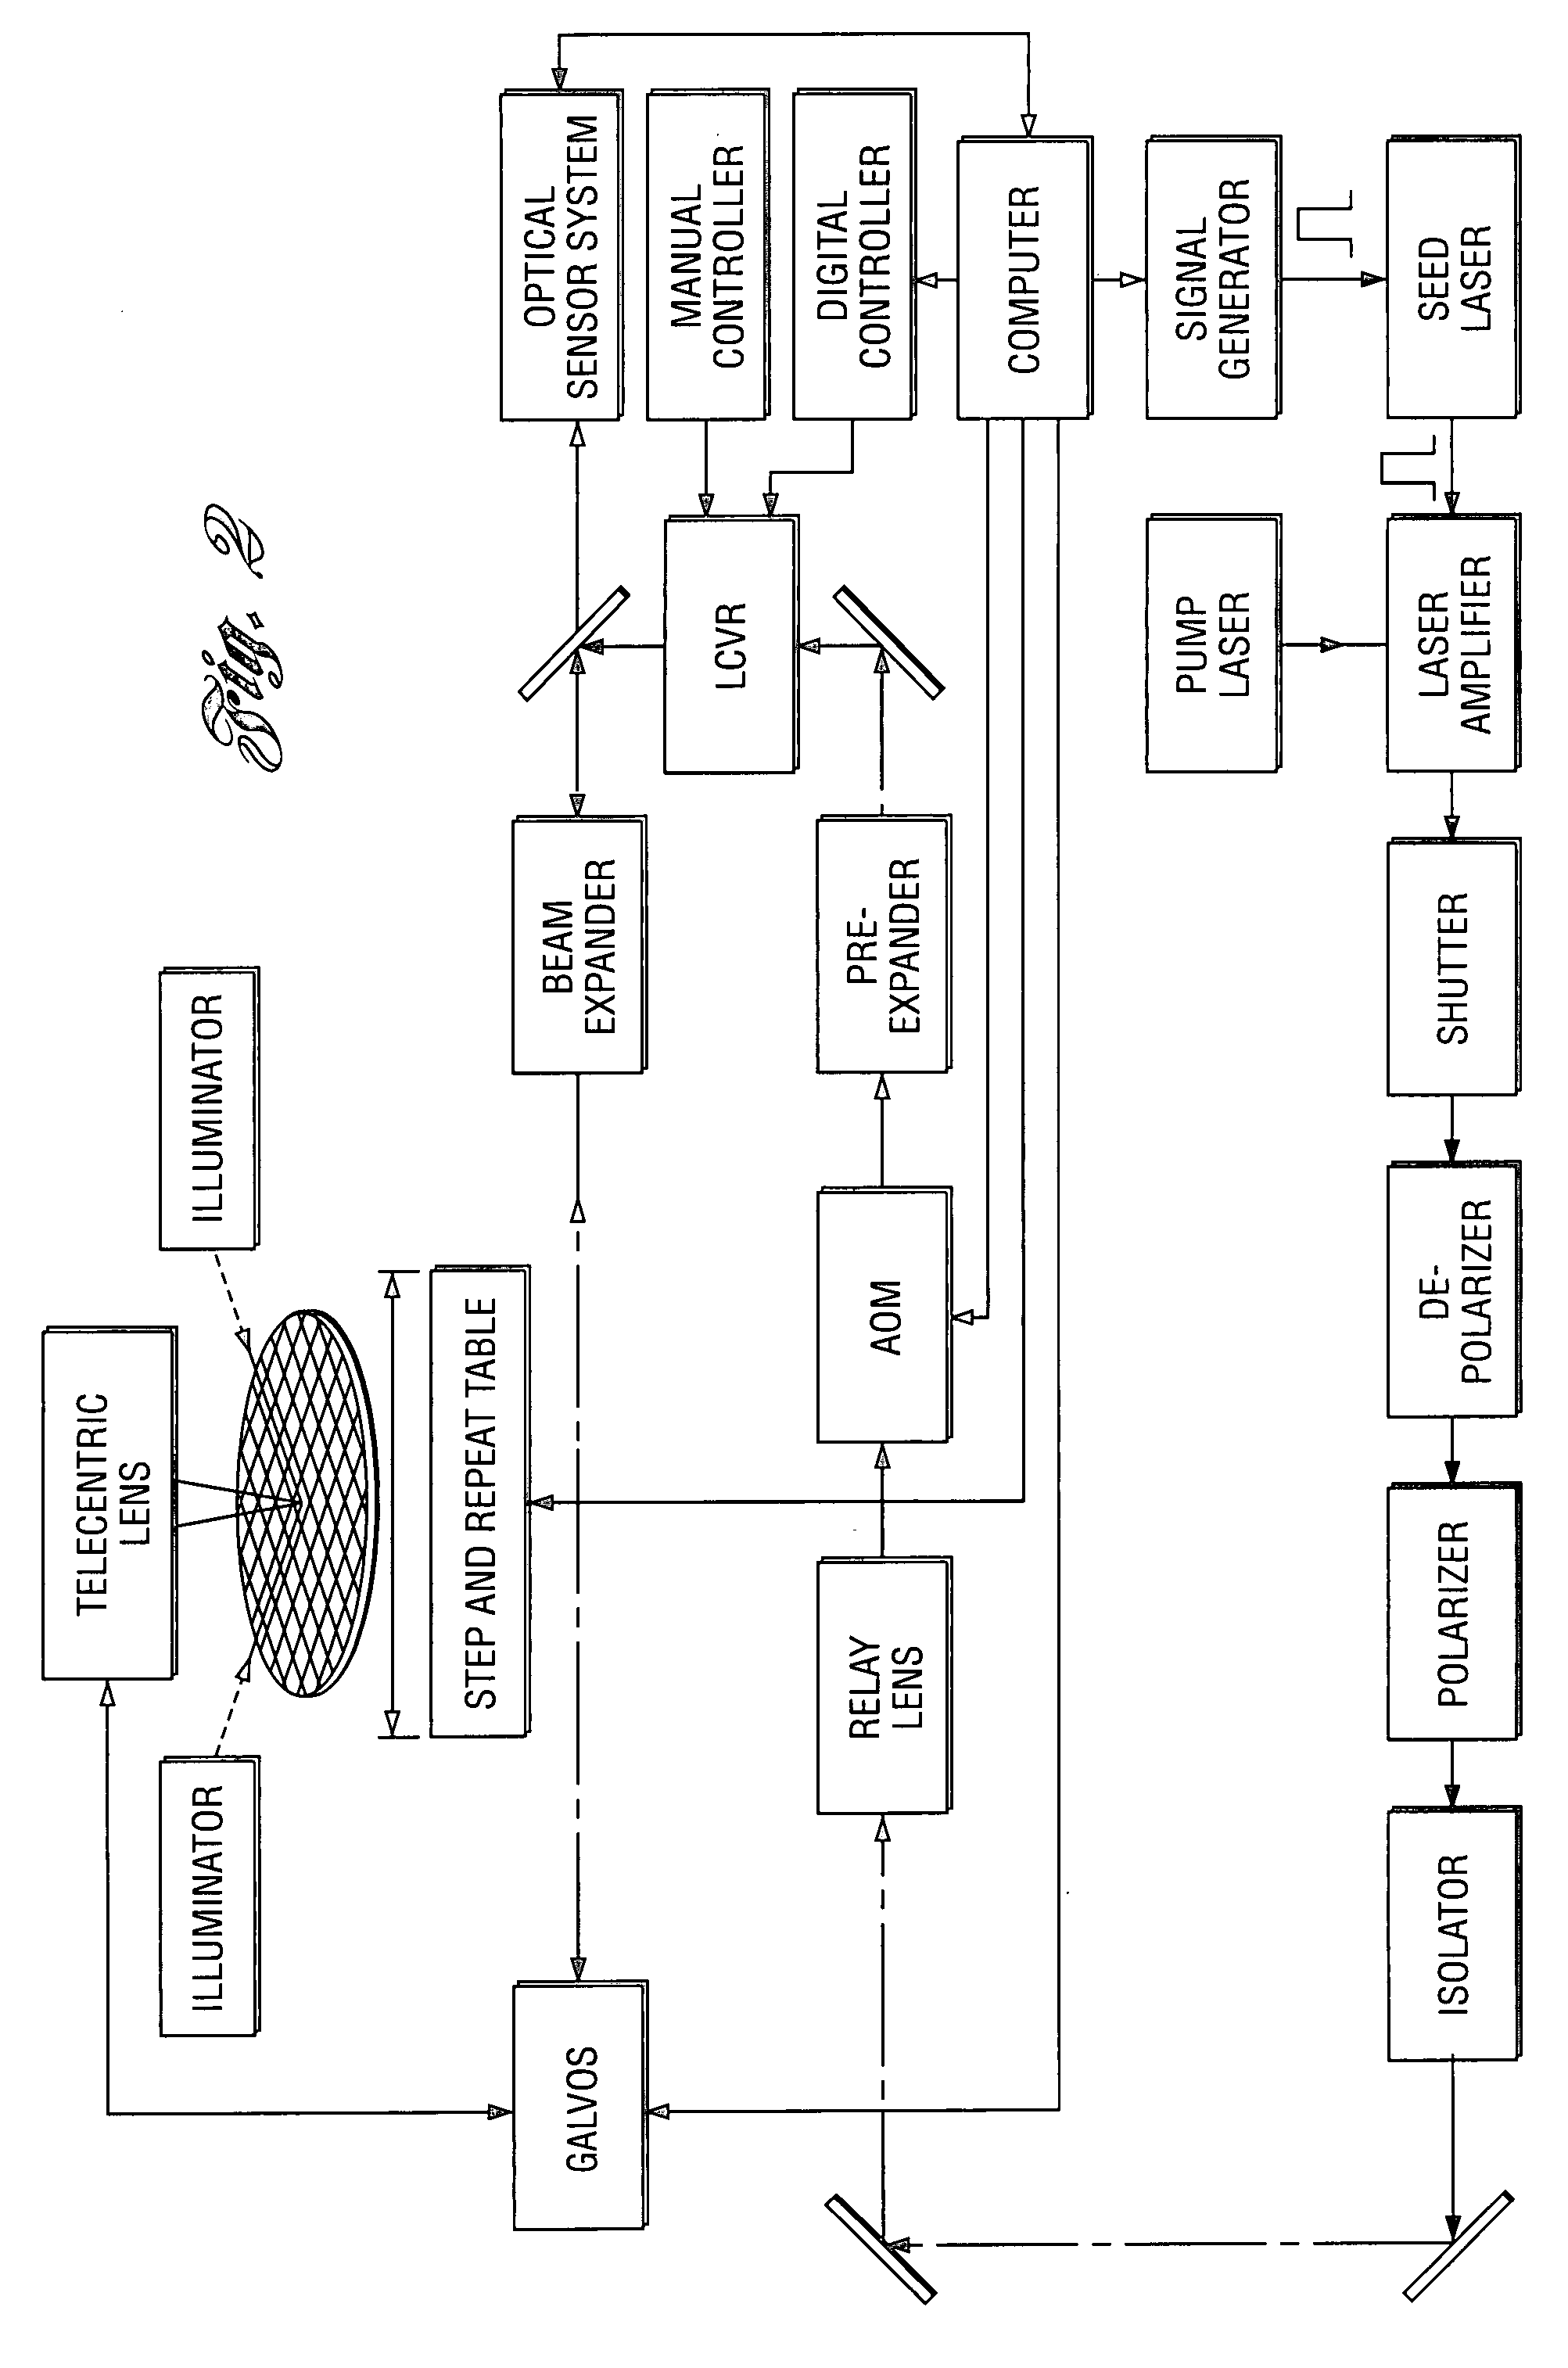 Method and system for laser processing targets of different types on a workpiece